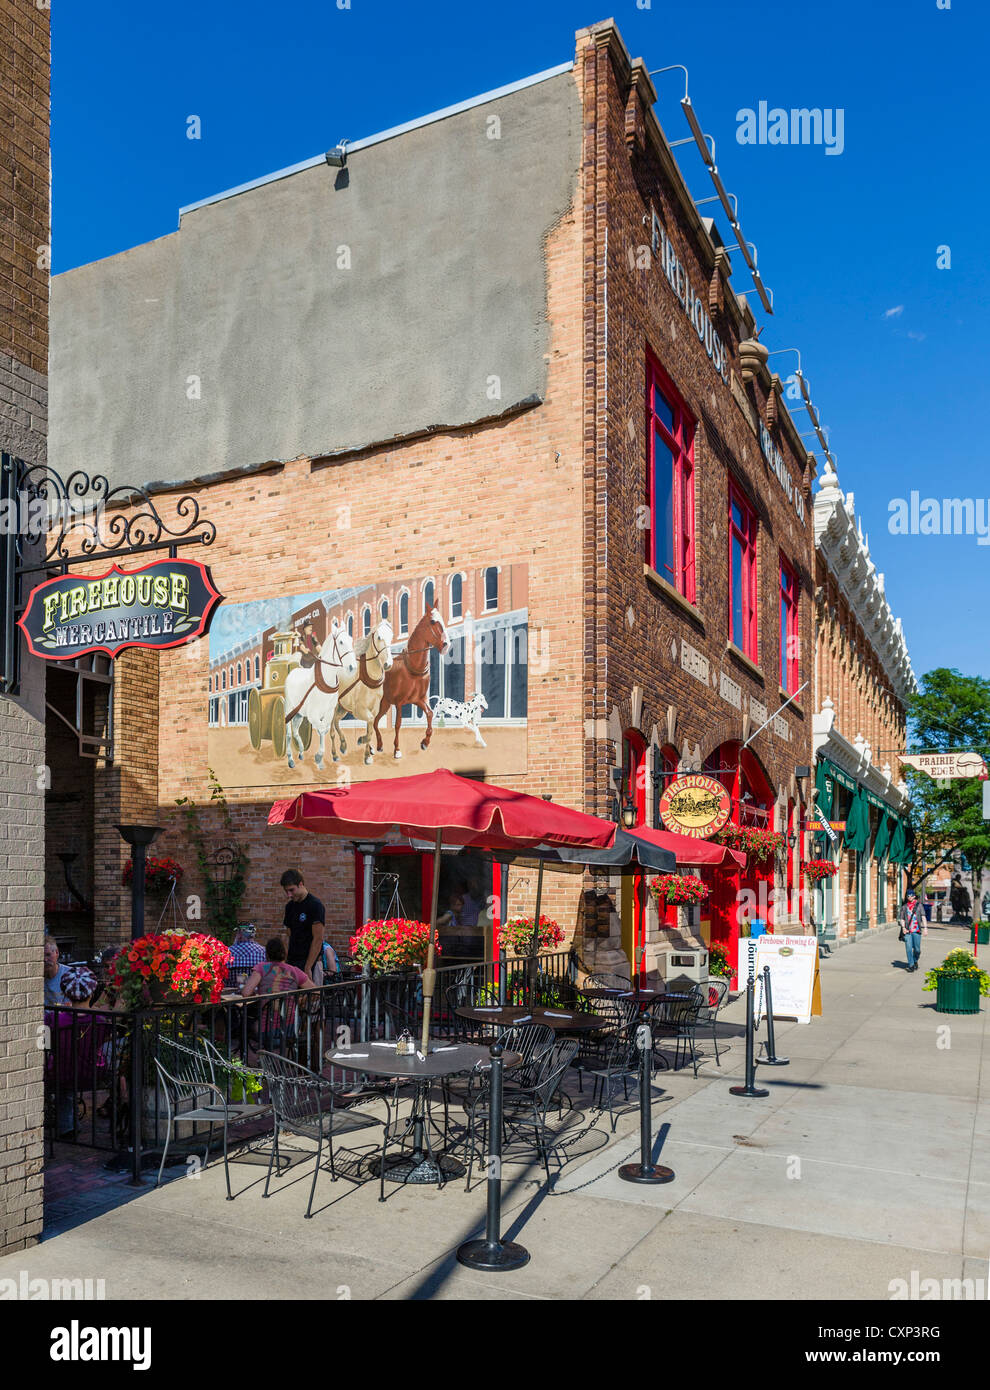 The Firehouse Brewing Co bar and brewery on Main Street in downtown Rapid City, South Dakota, USA Stock Photo